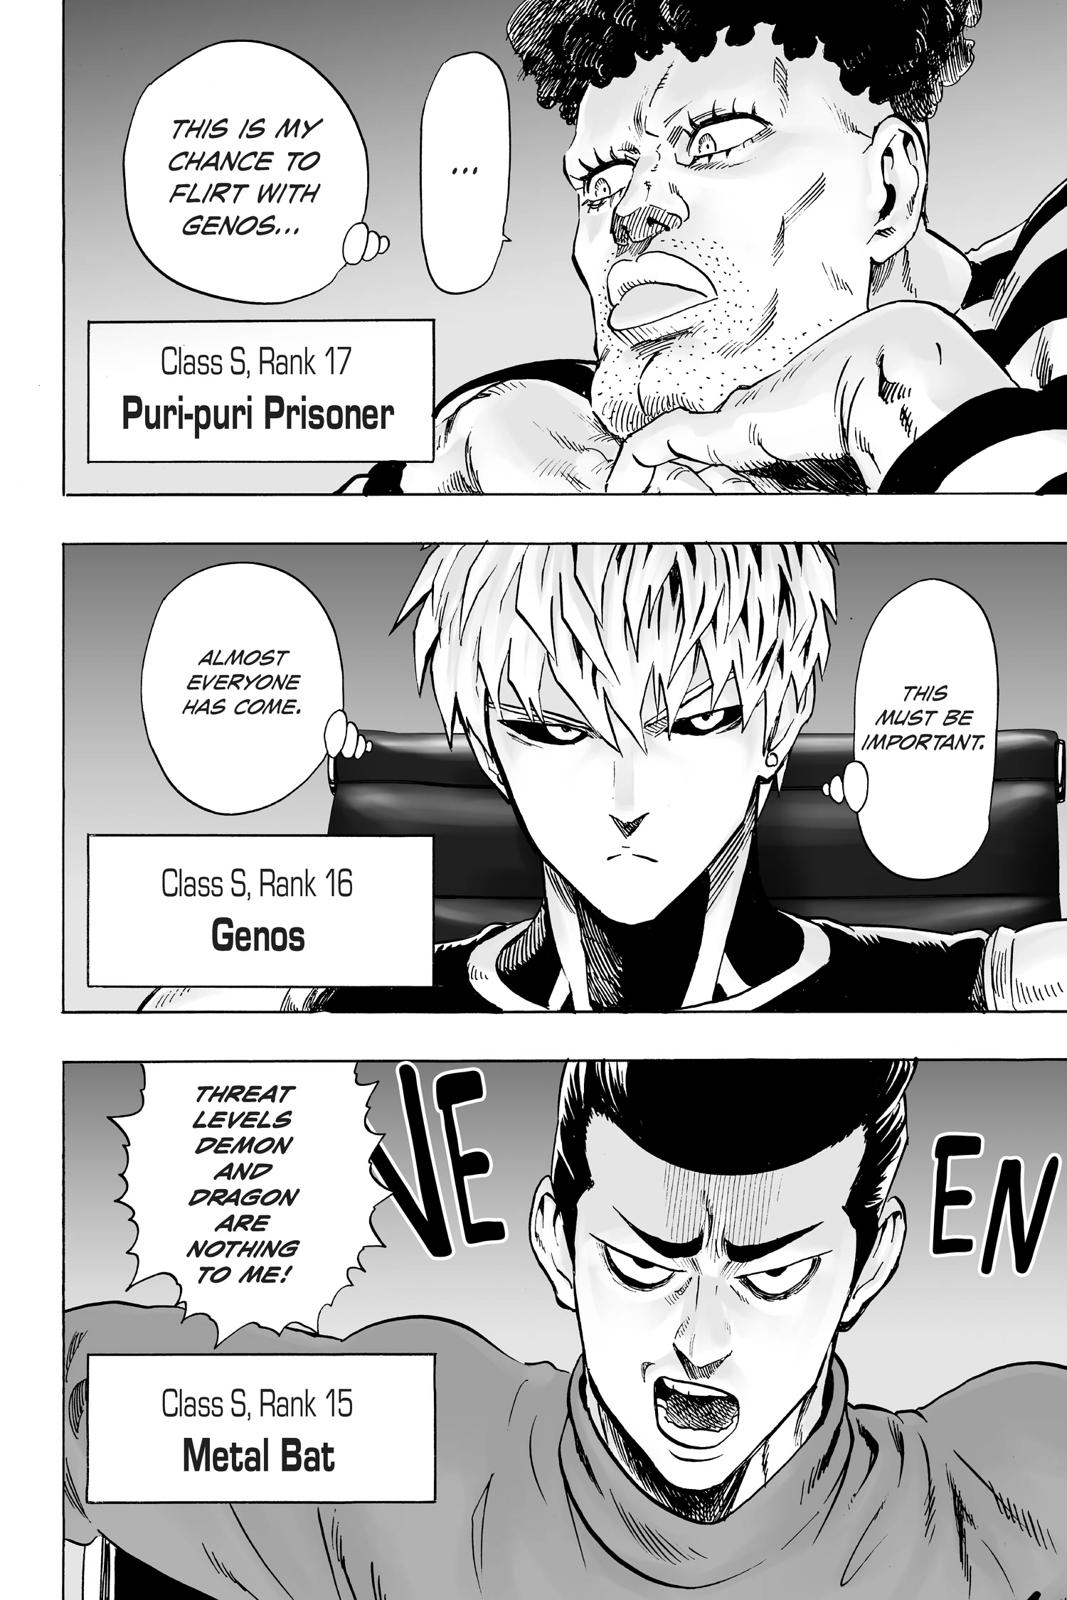 One-Punch Man, Punch 30 image 20